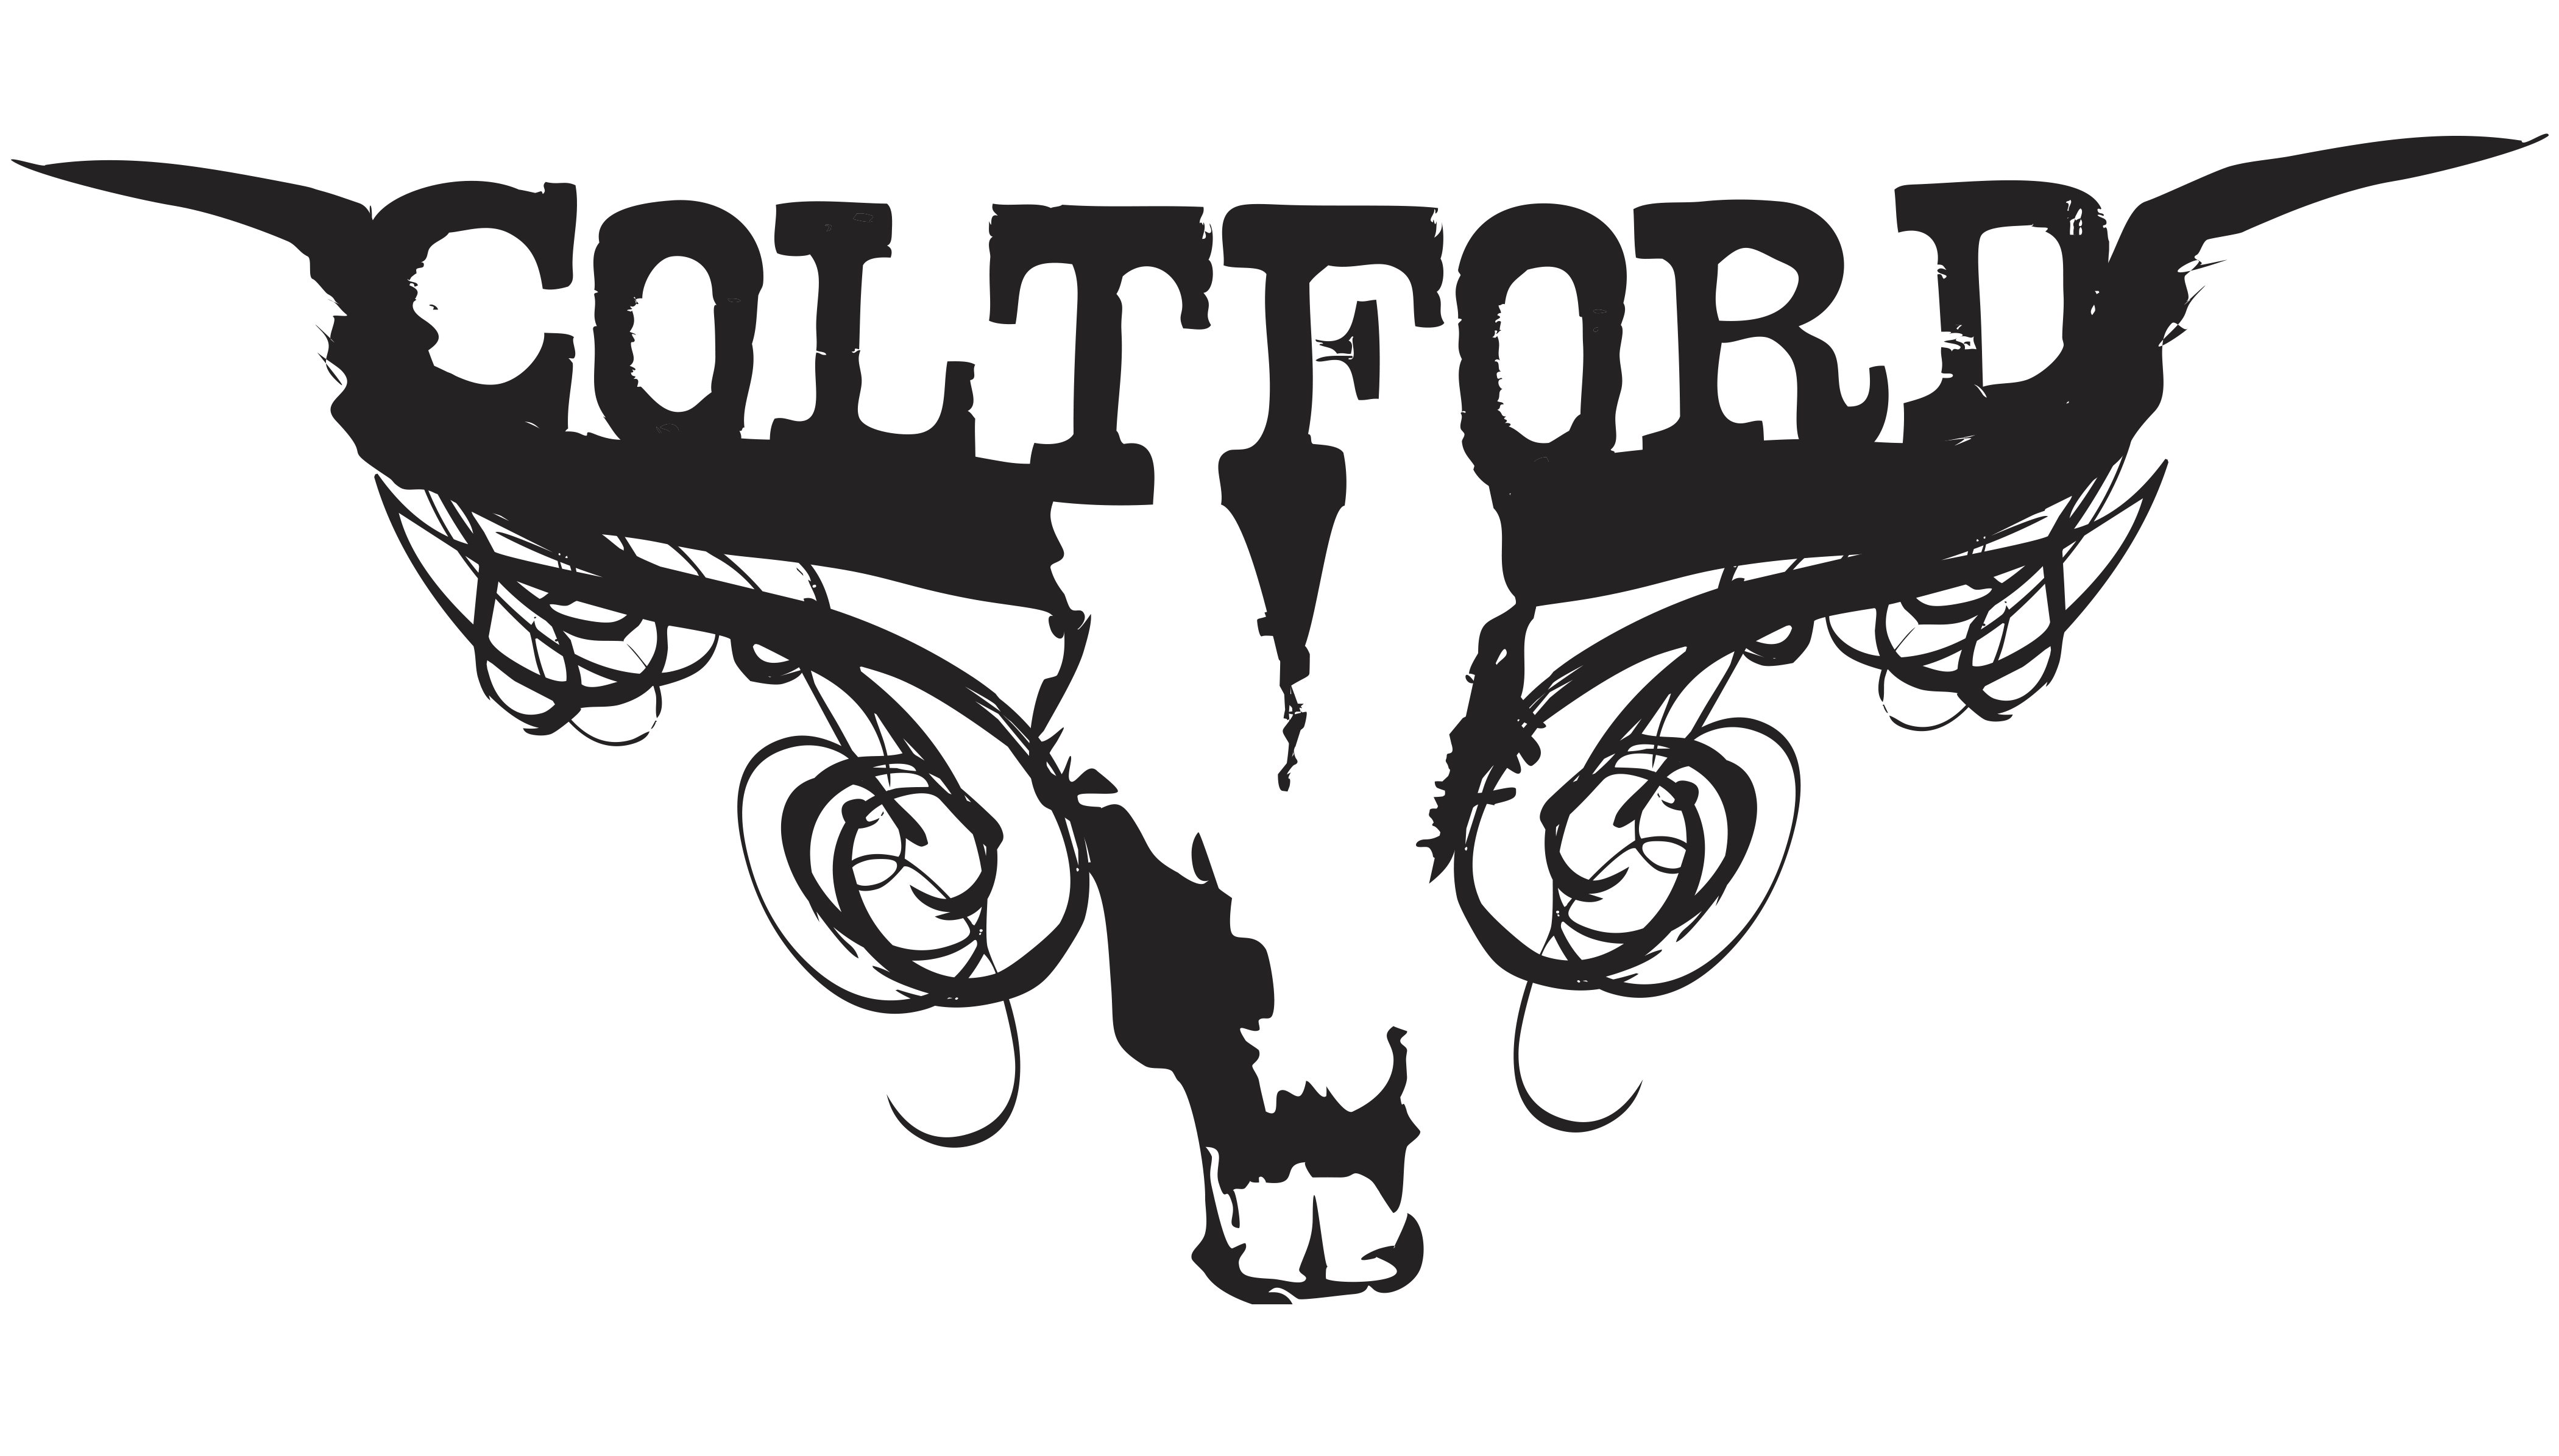 Colt Ford Wallpapers